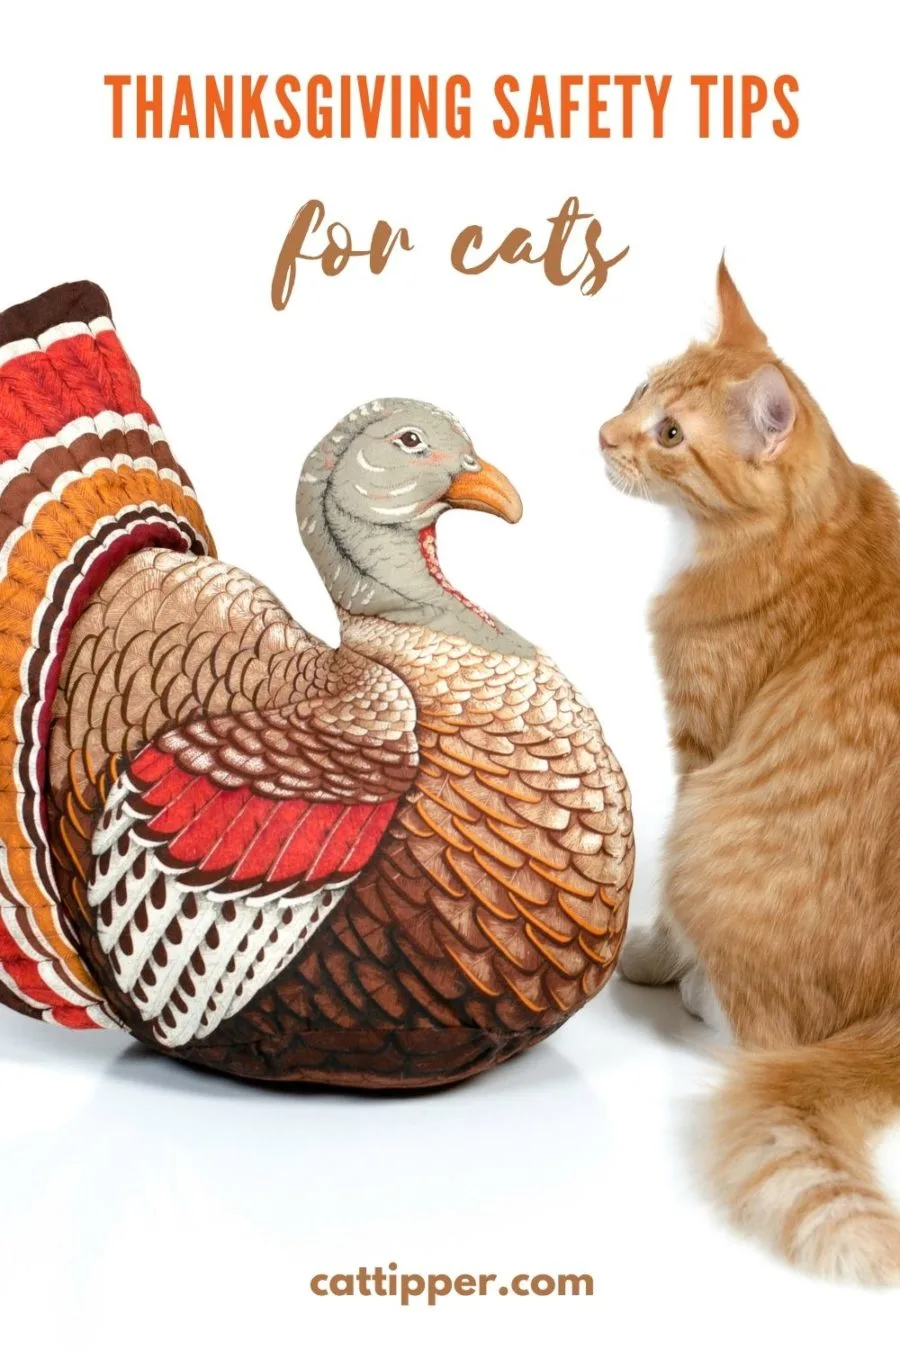 Thanksgiving safety tips for cats